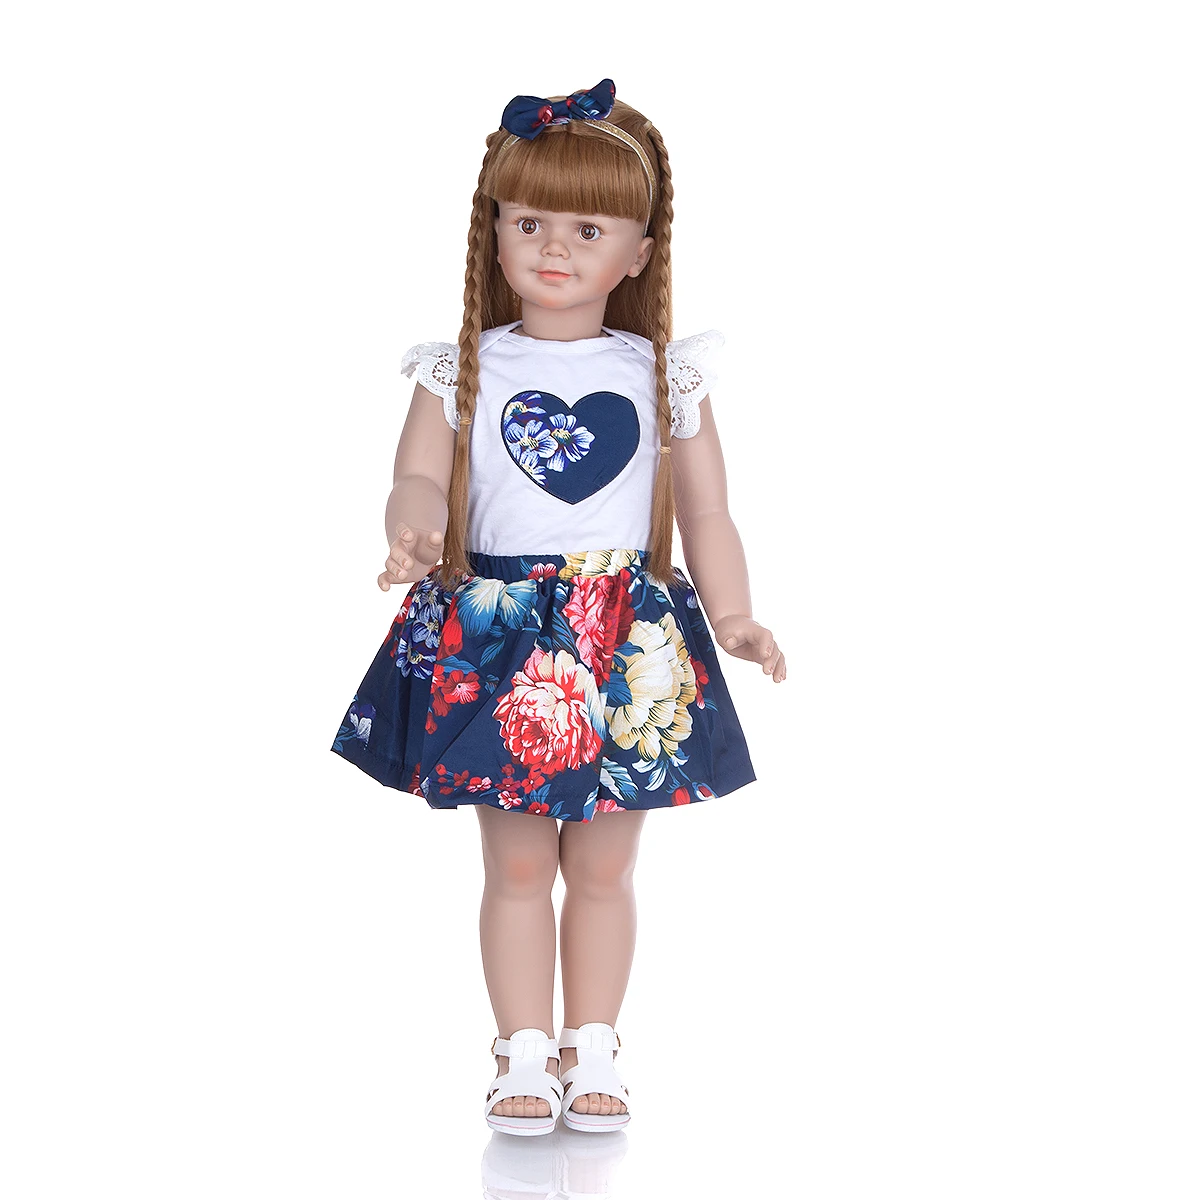 78cm Silicone Vinyl Reborn Baby Doll Toy For Girl Exquisite Princess Toddler Babies Child Birthday Gift Play House Toy Bebe doll